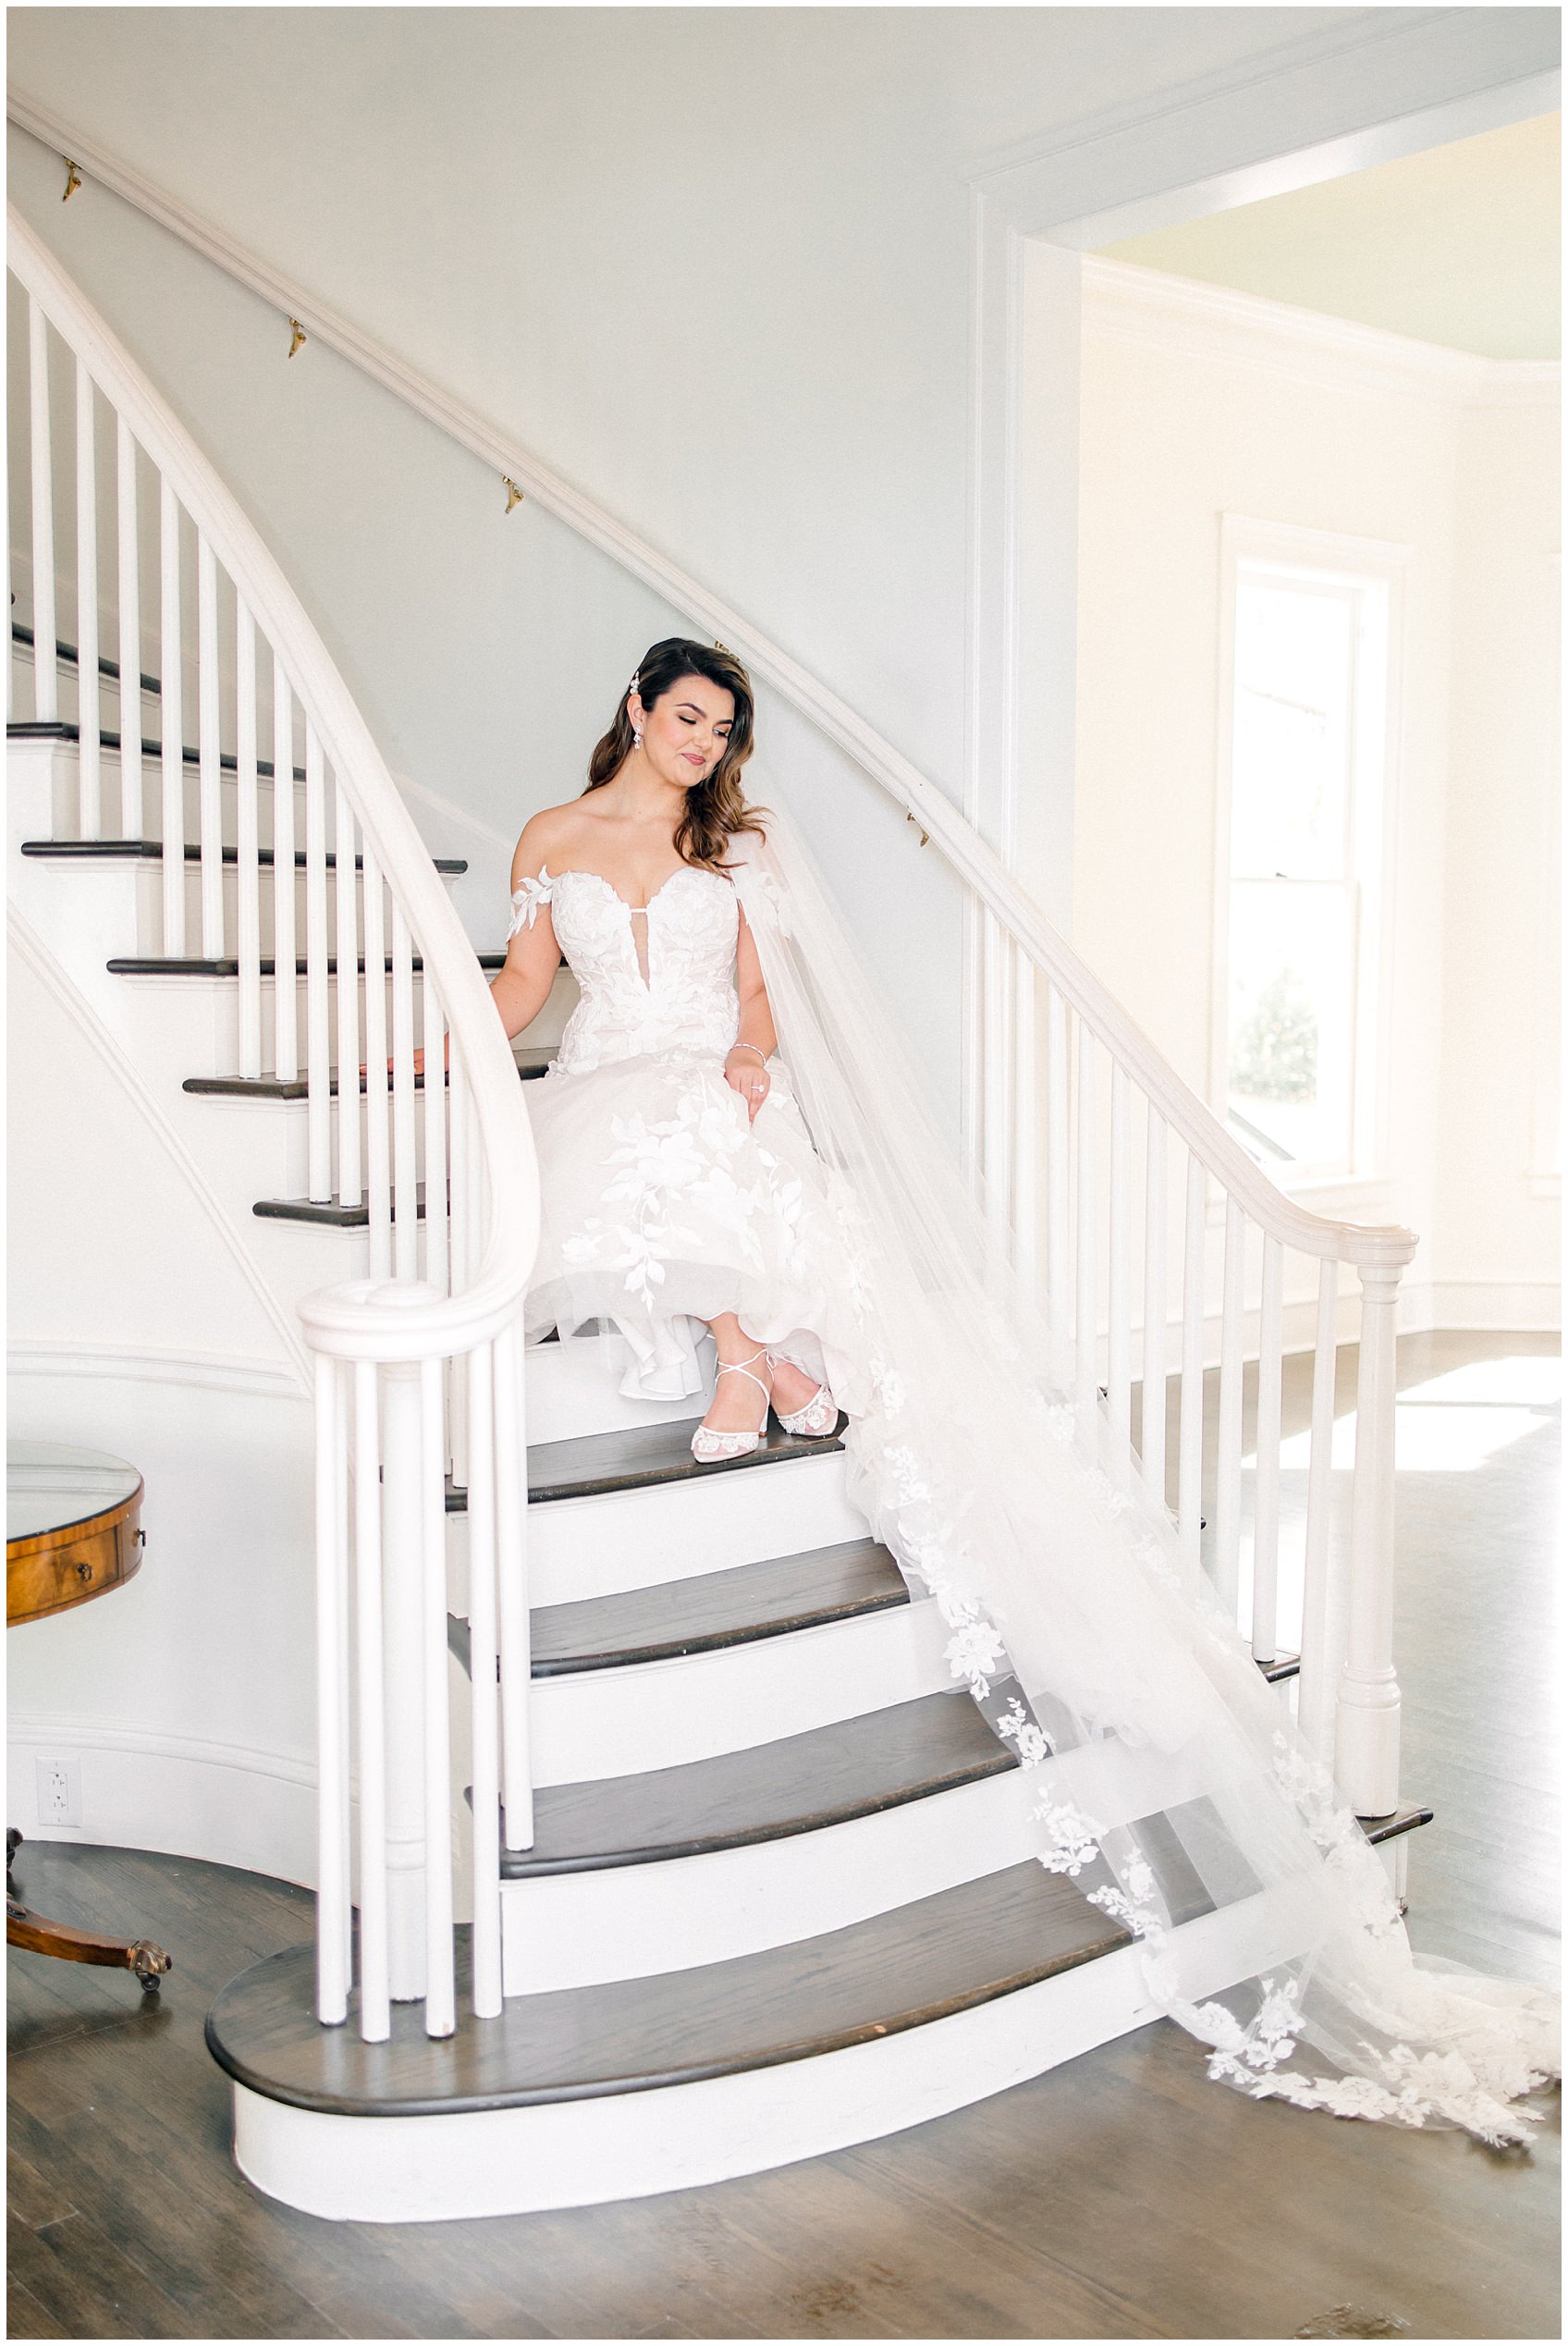 Woodbine Mansion Spring Bridal wedding Photos by Allison Jeffers Photography 0016